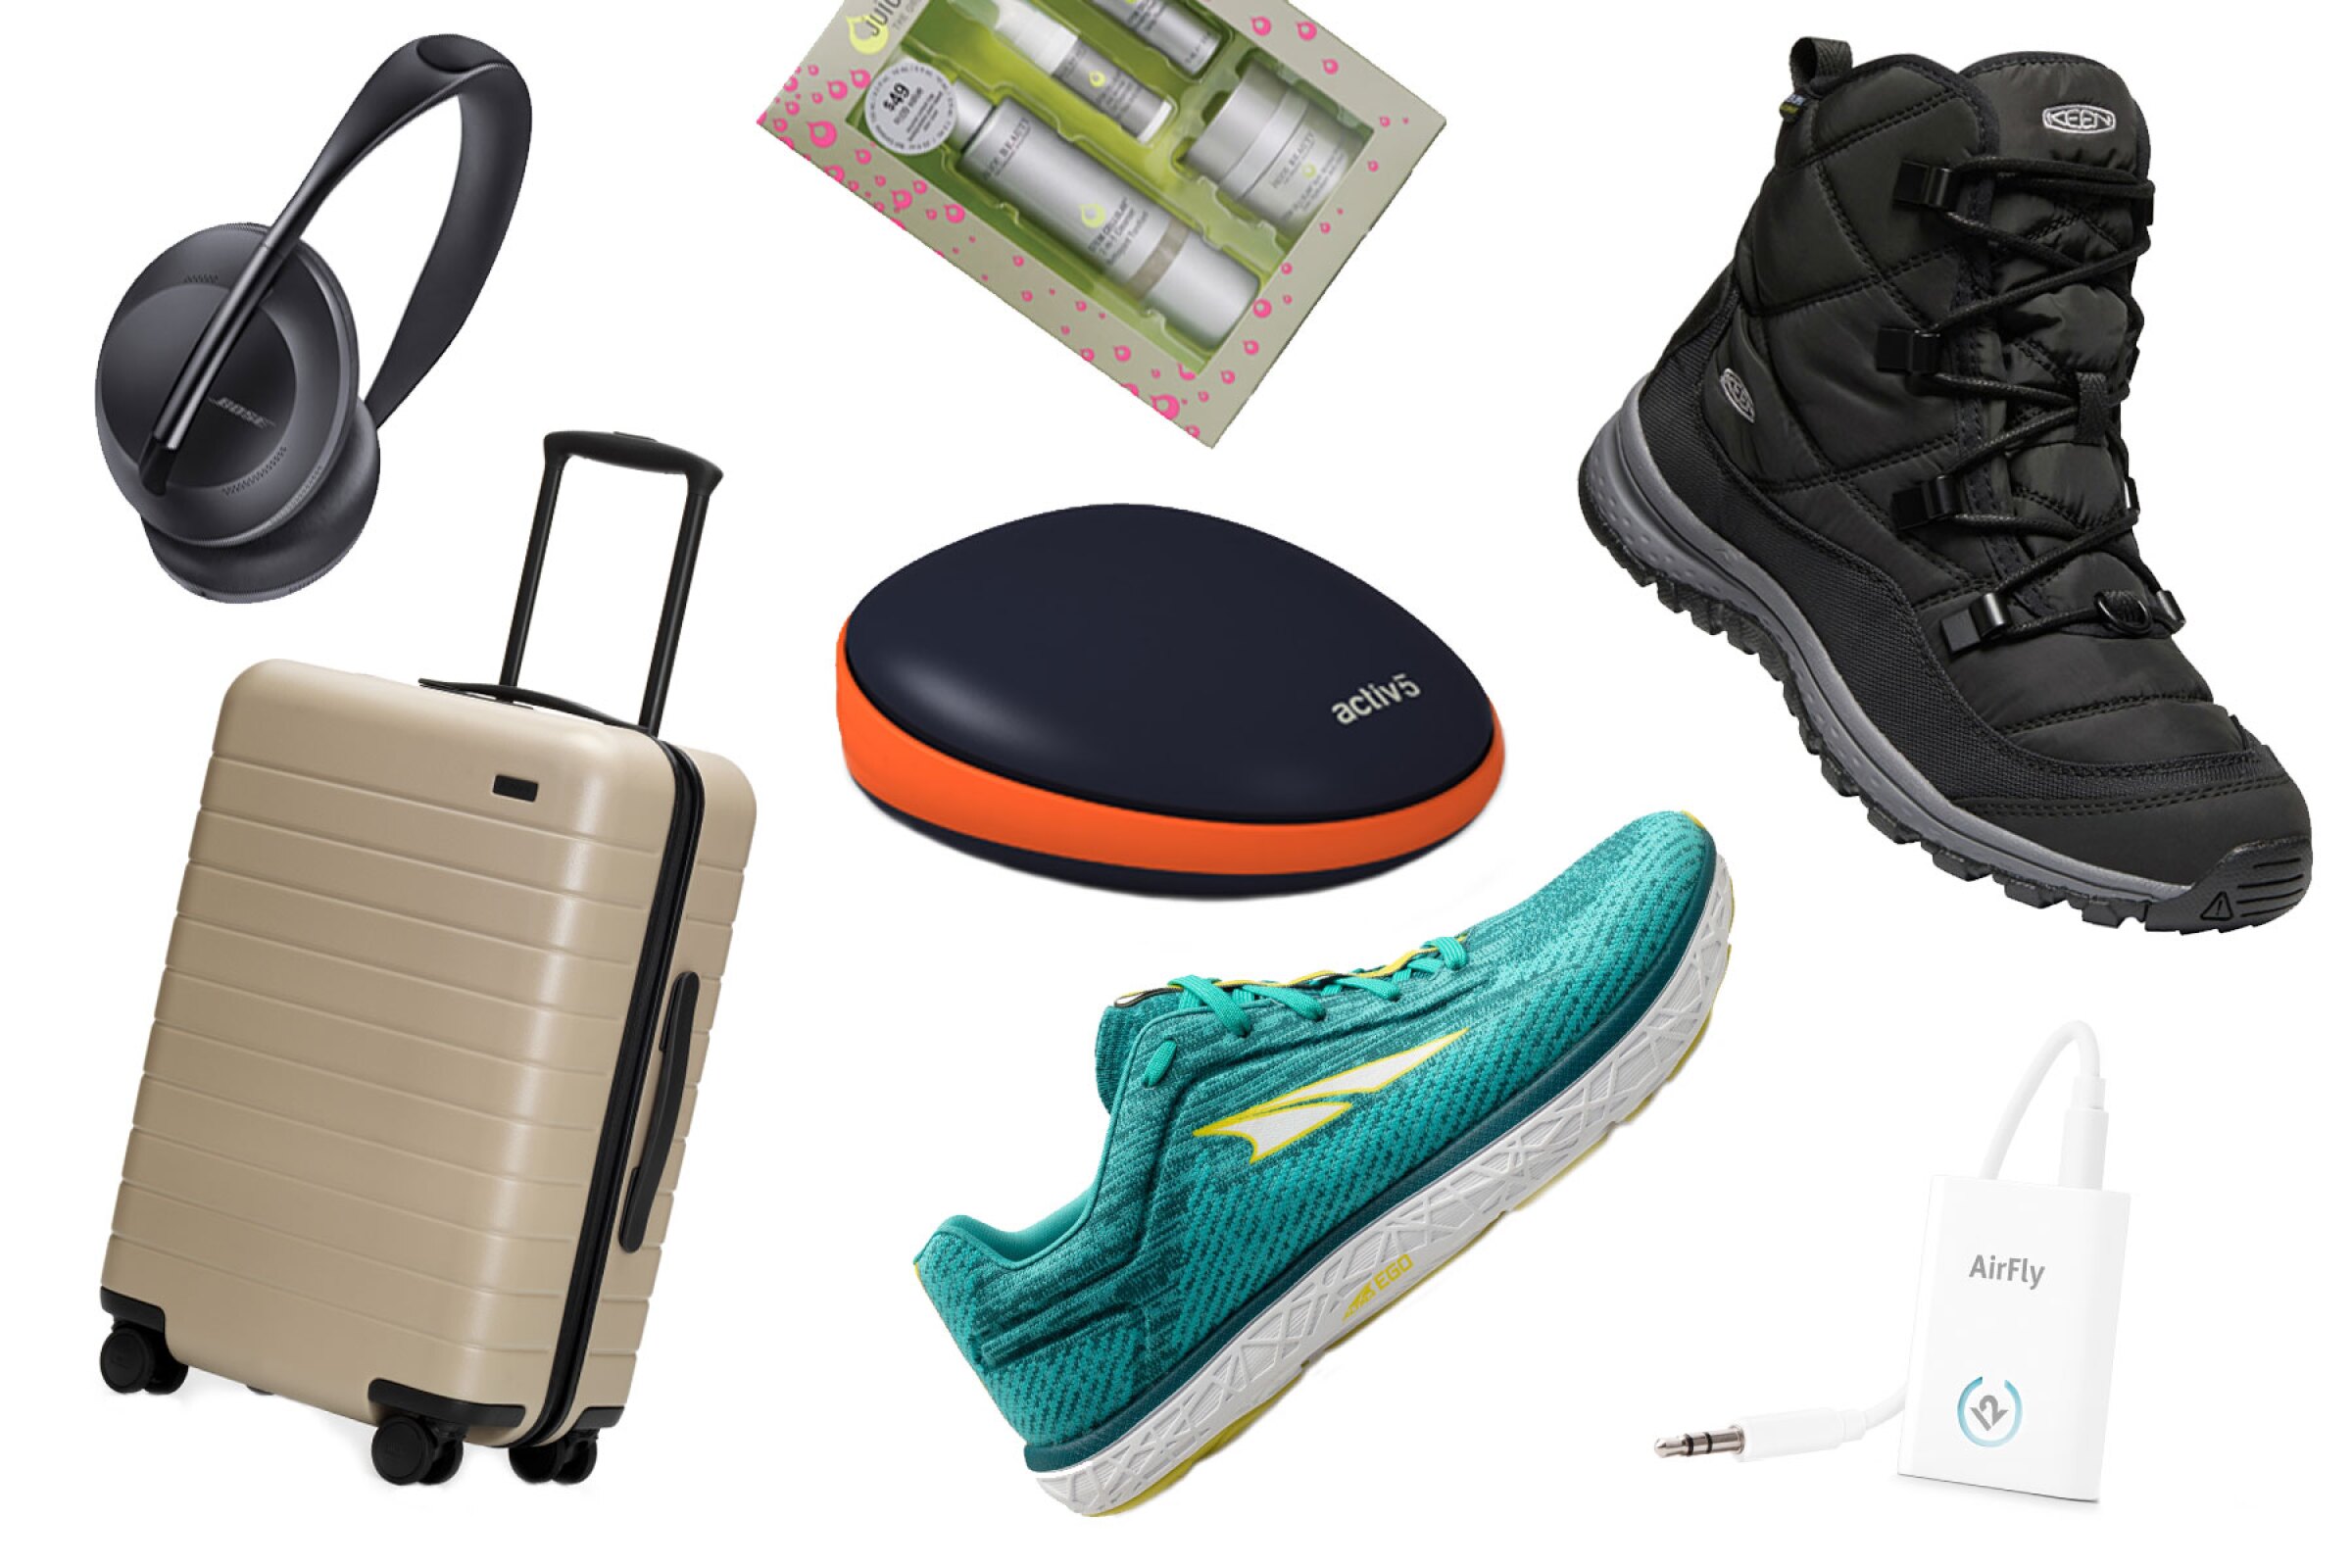 Travel gift guide